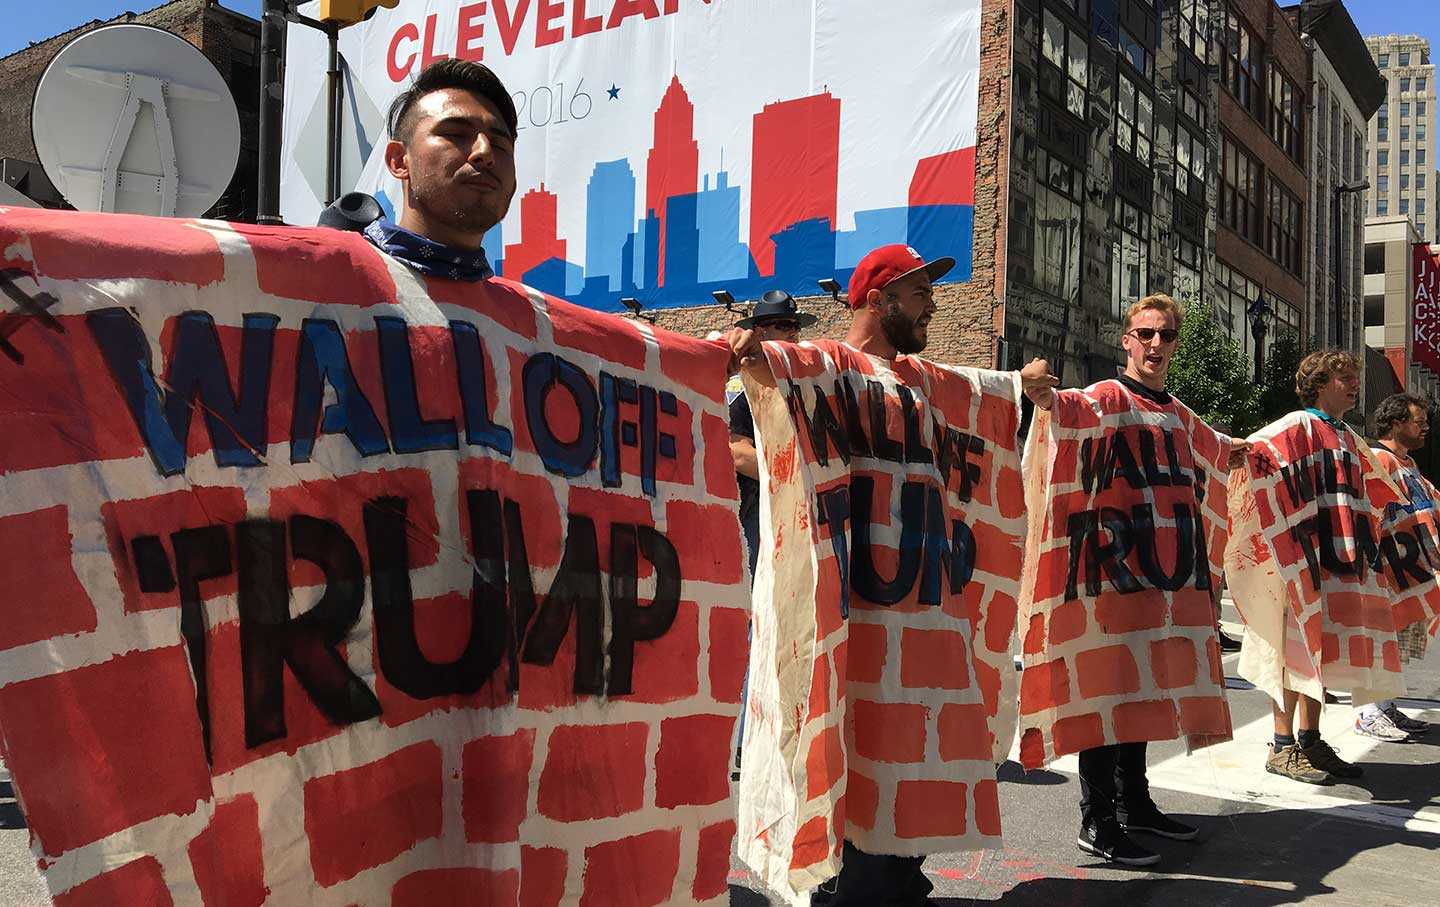 Protesters in Cleveland Bring the Wall to Donald Trump